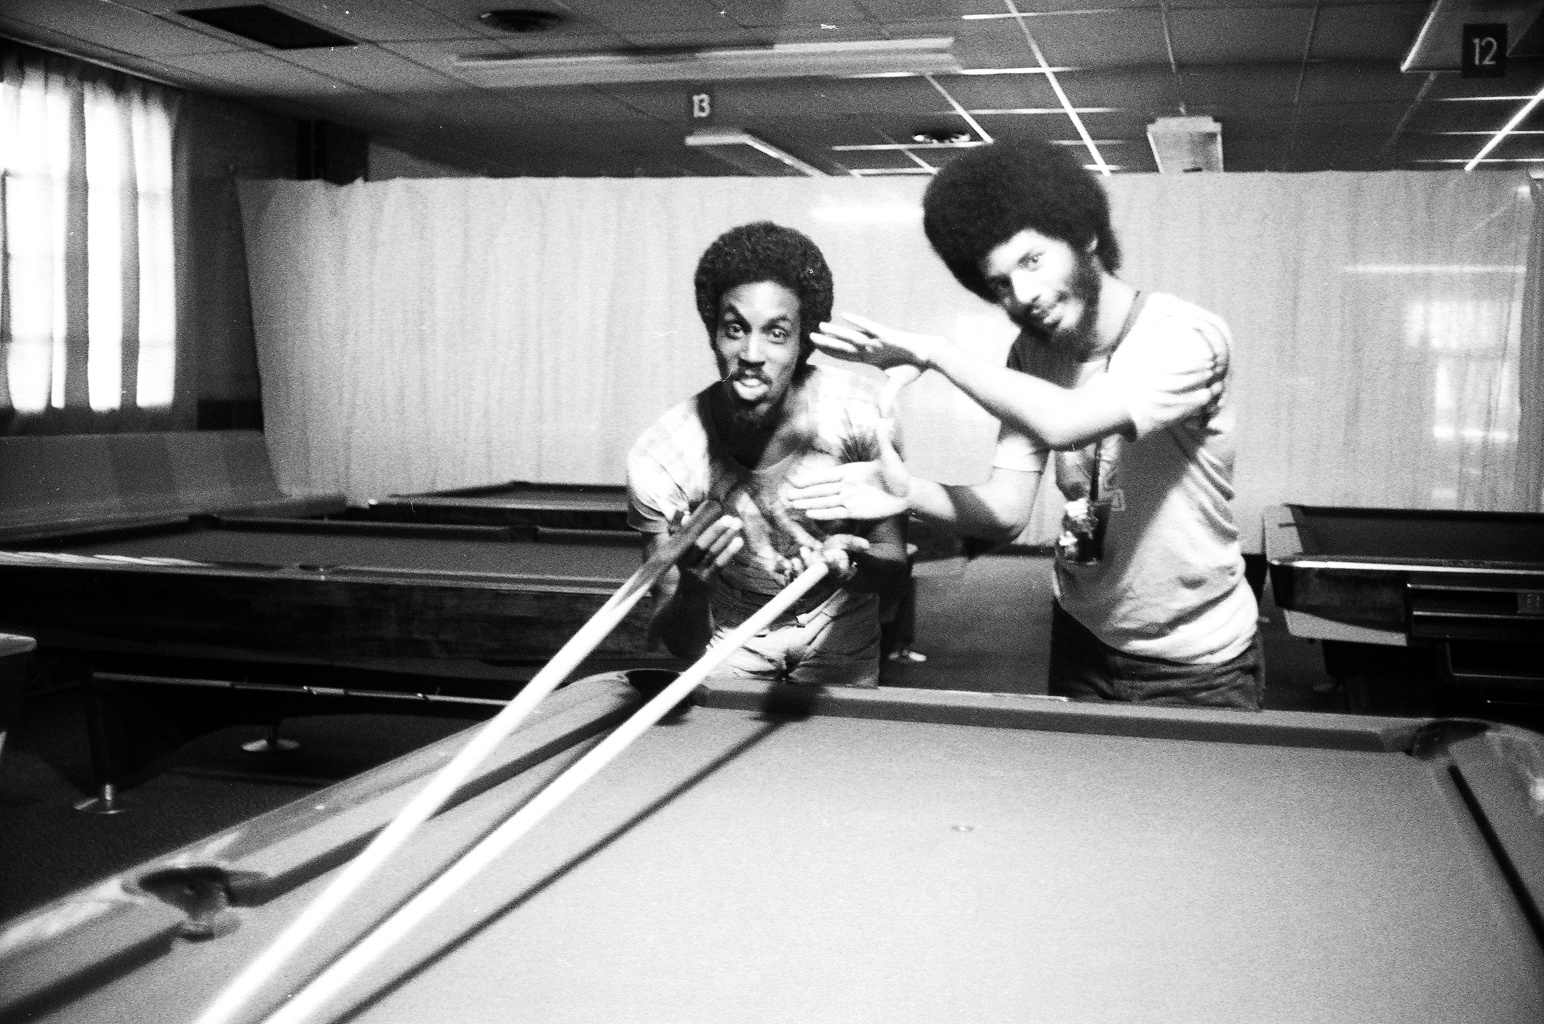 Cinematographer Adrian Best takes a shot at the pool table with assistant cameraman Ronald Gray during the filming of POOL HALL GIRL.